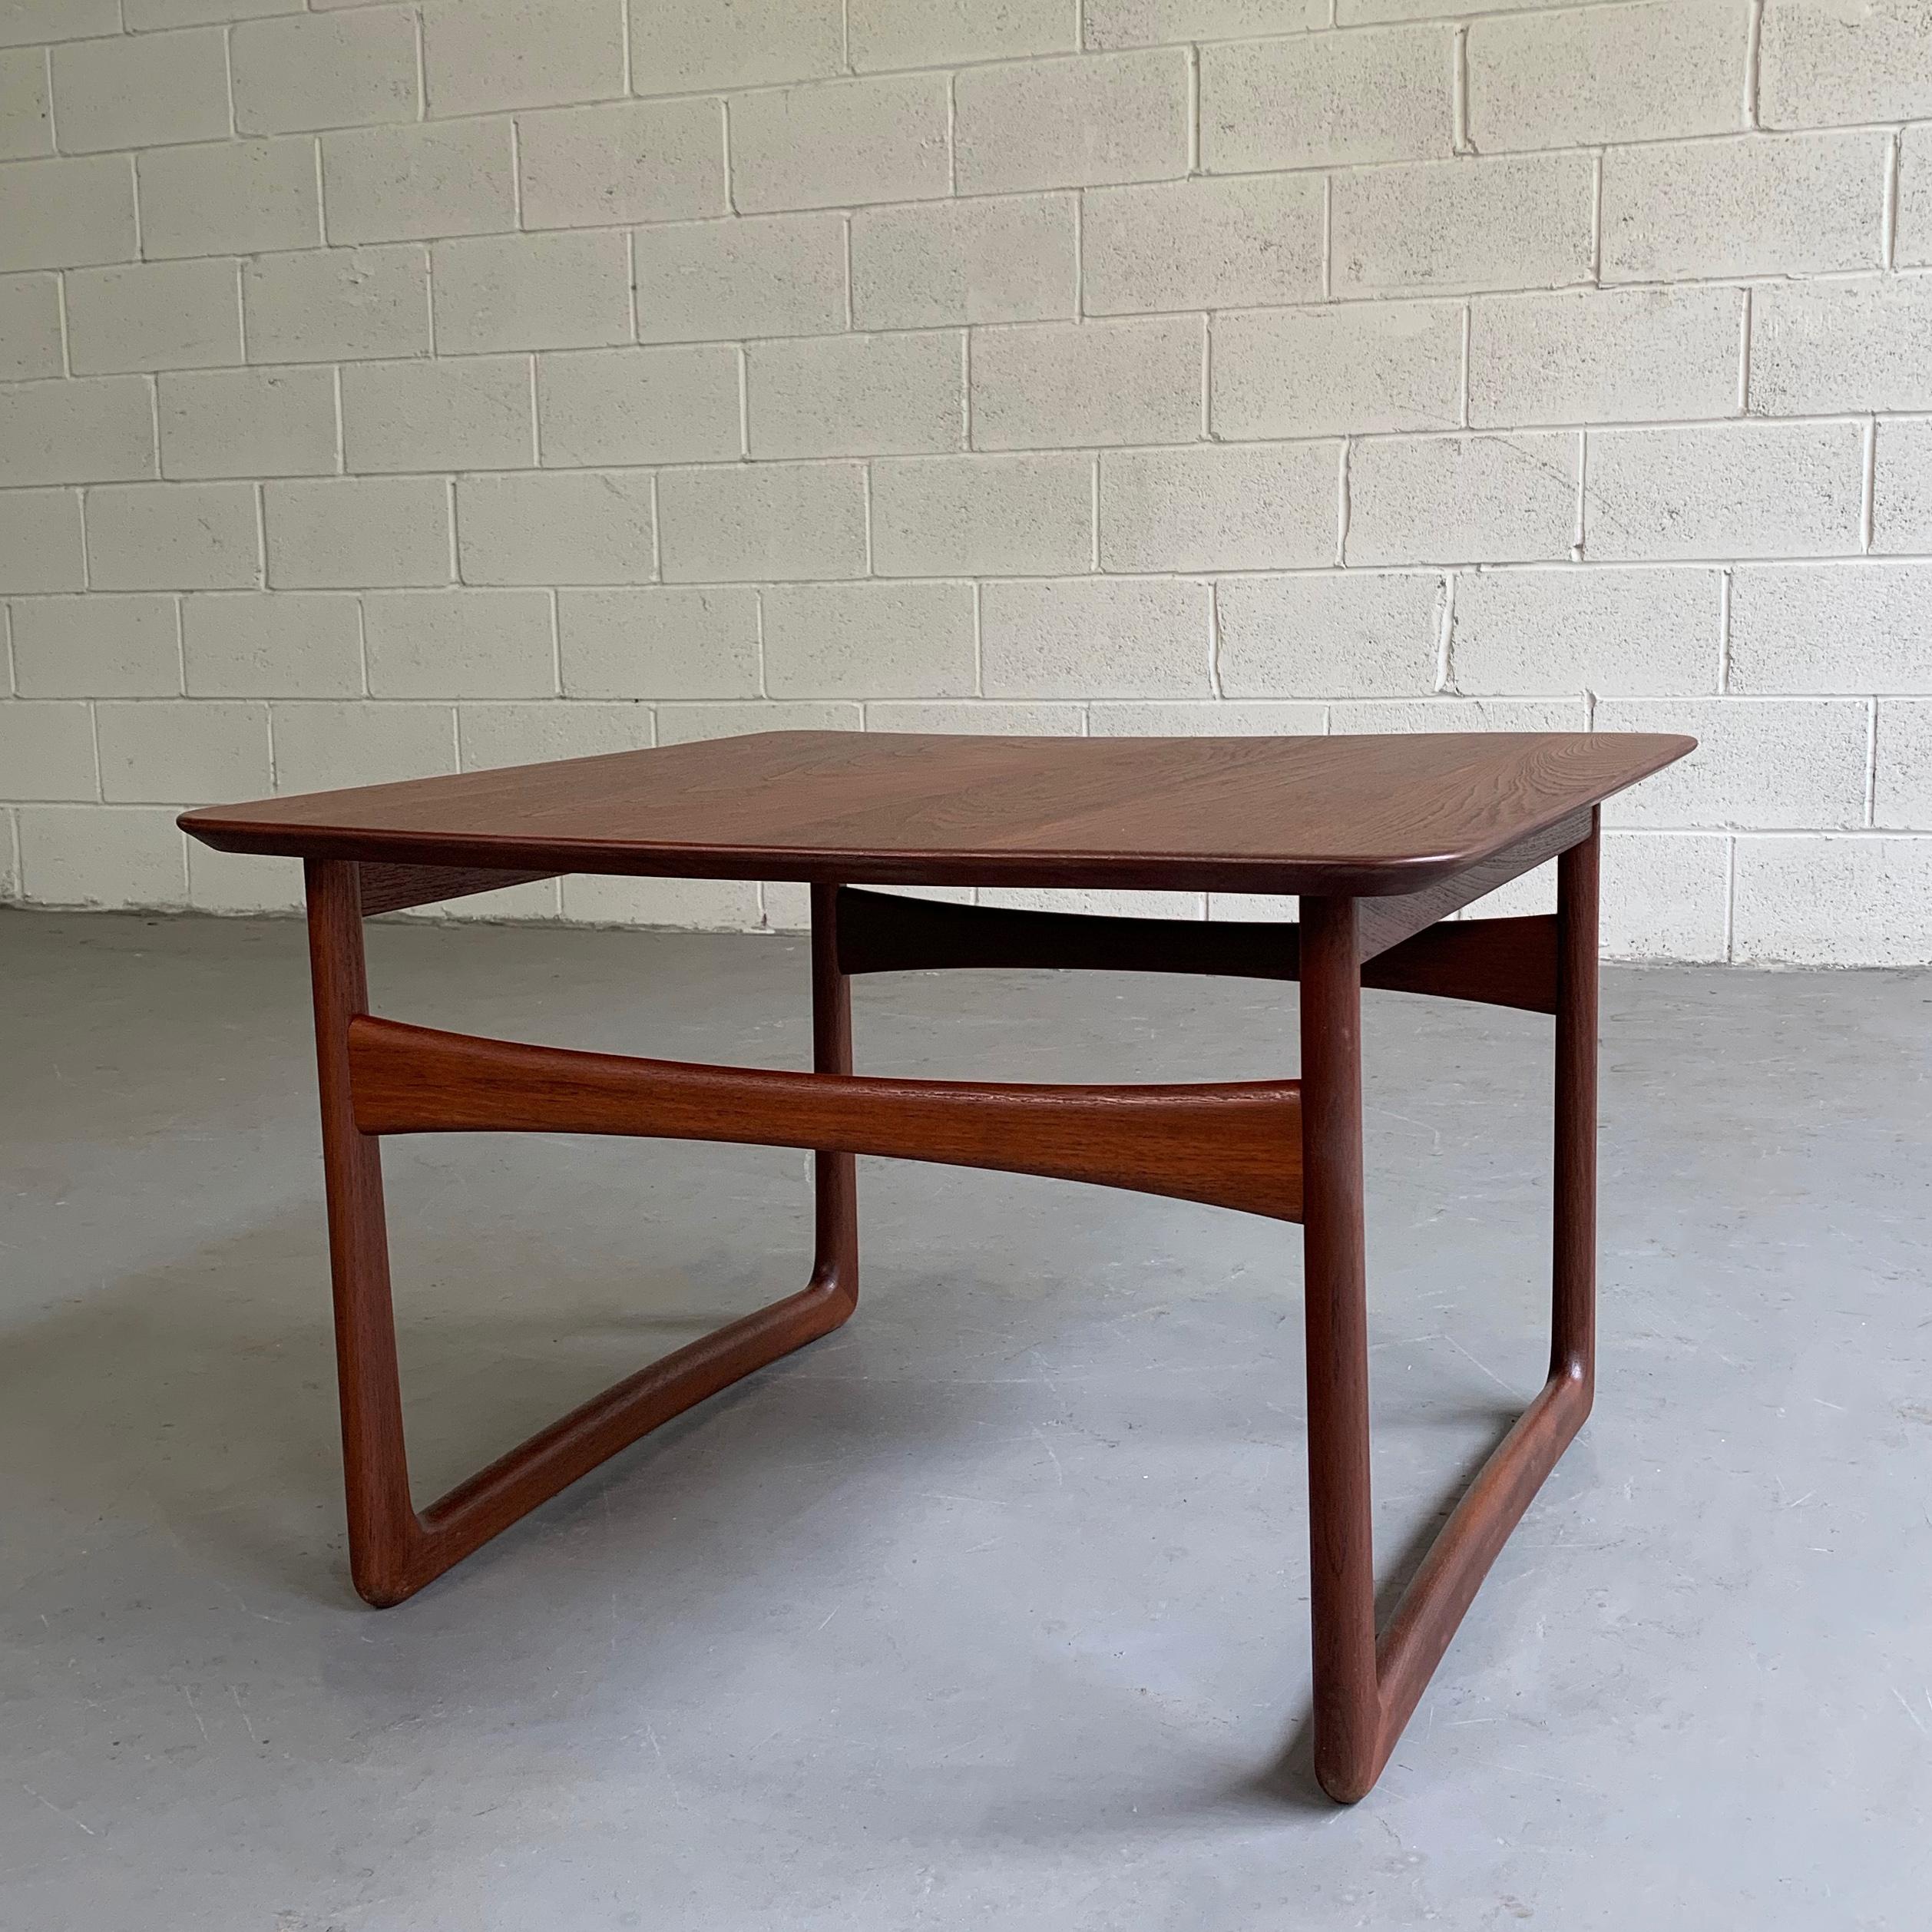 Elegant, Mid-Century Modern, teak, side table by Peter Hvidt & Orla Mølgaard-Nielsen sold by John Stuart features sleigh legs that are interesting from all angles. Two tables are available.